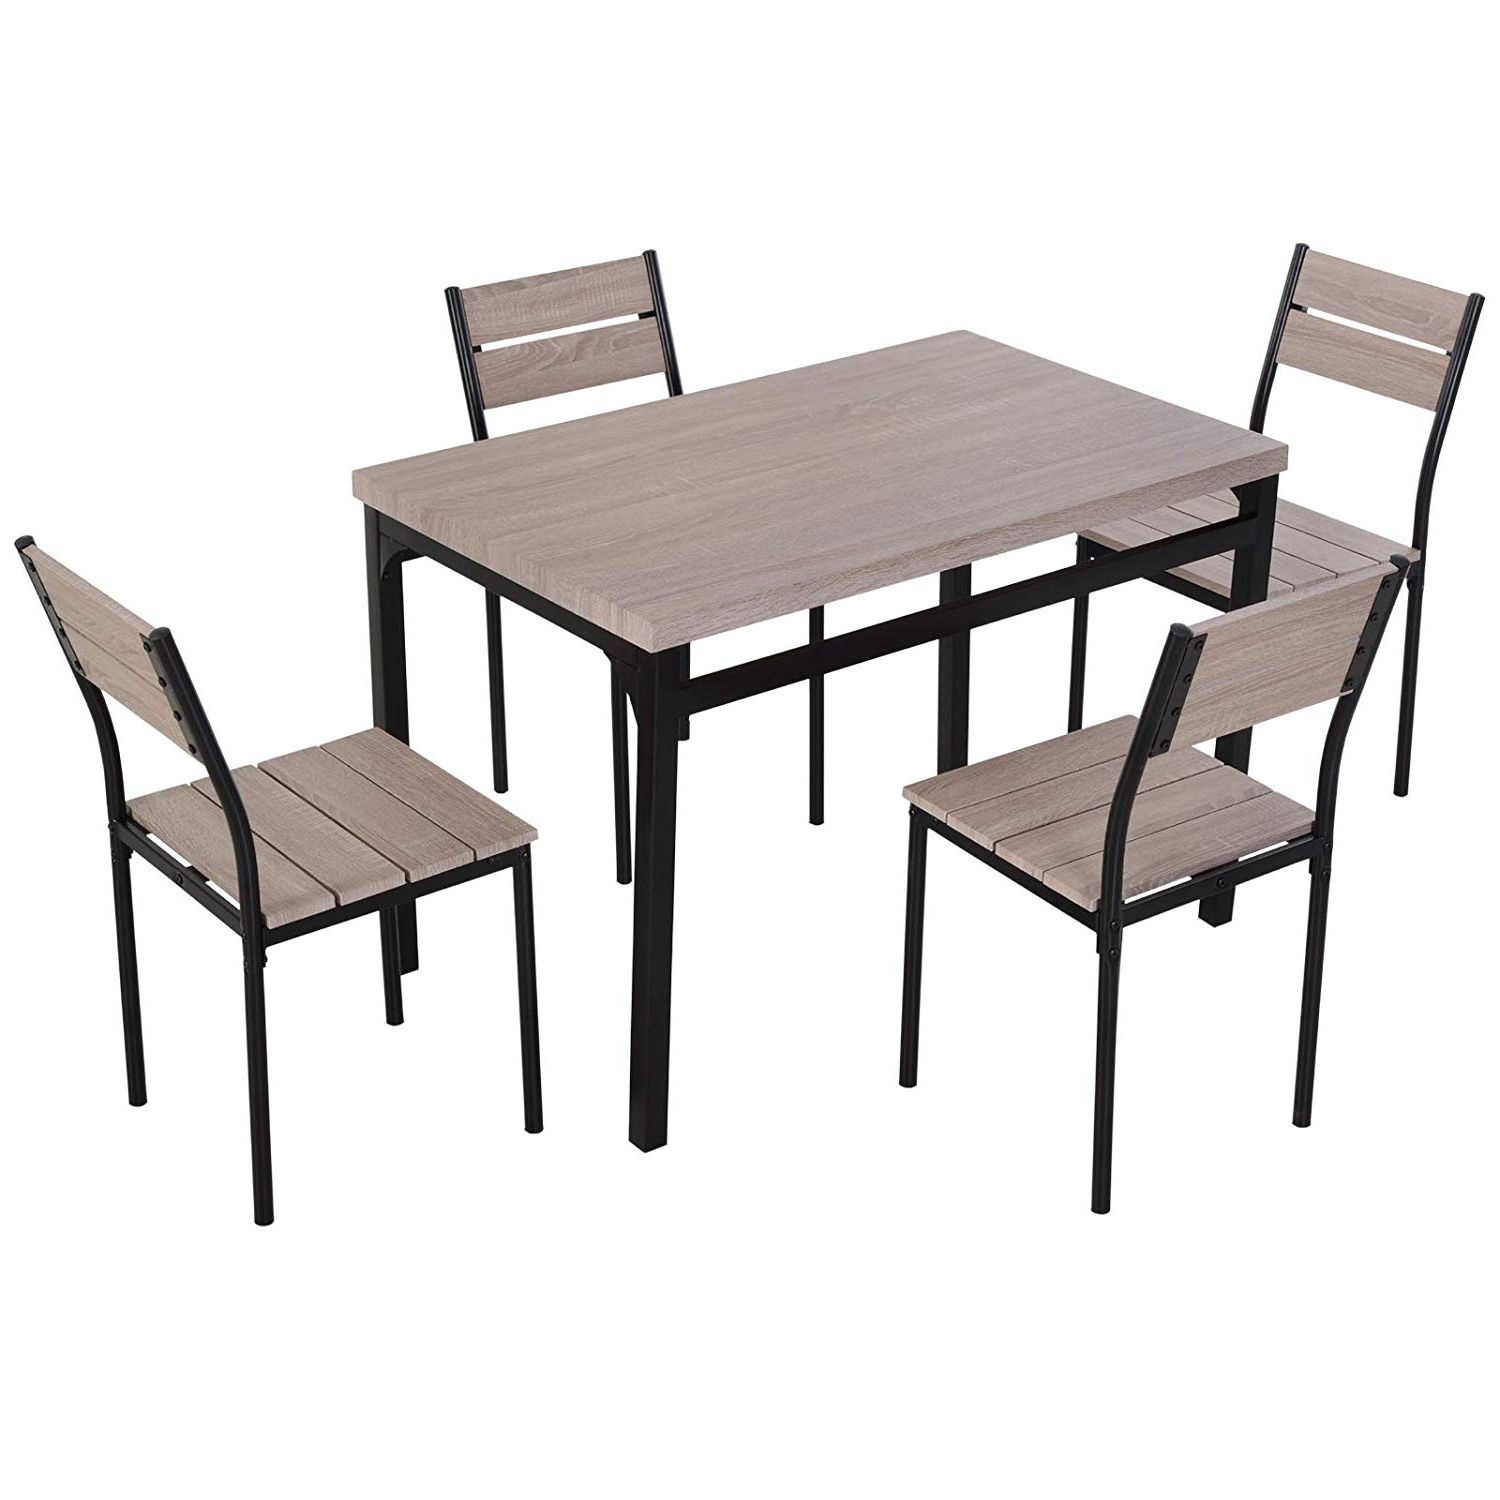 Newest Homcom 5 Piece Transitional Style Dining Room Table Set With Chairs Regarding Transitional 4 Seating Drop Leaf Casual Dining Tables (View 16 of 30)